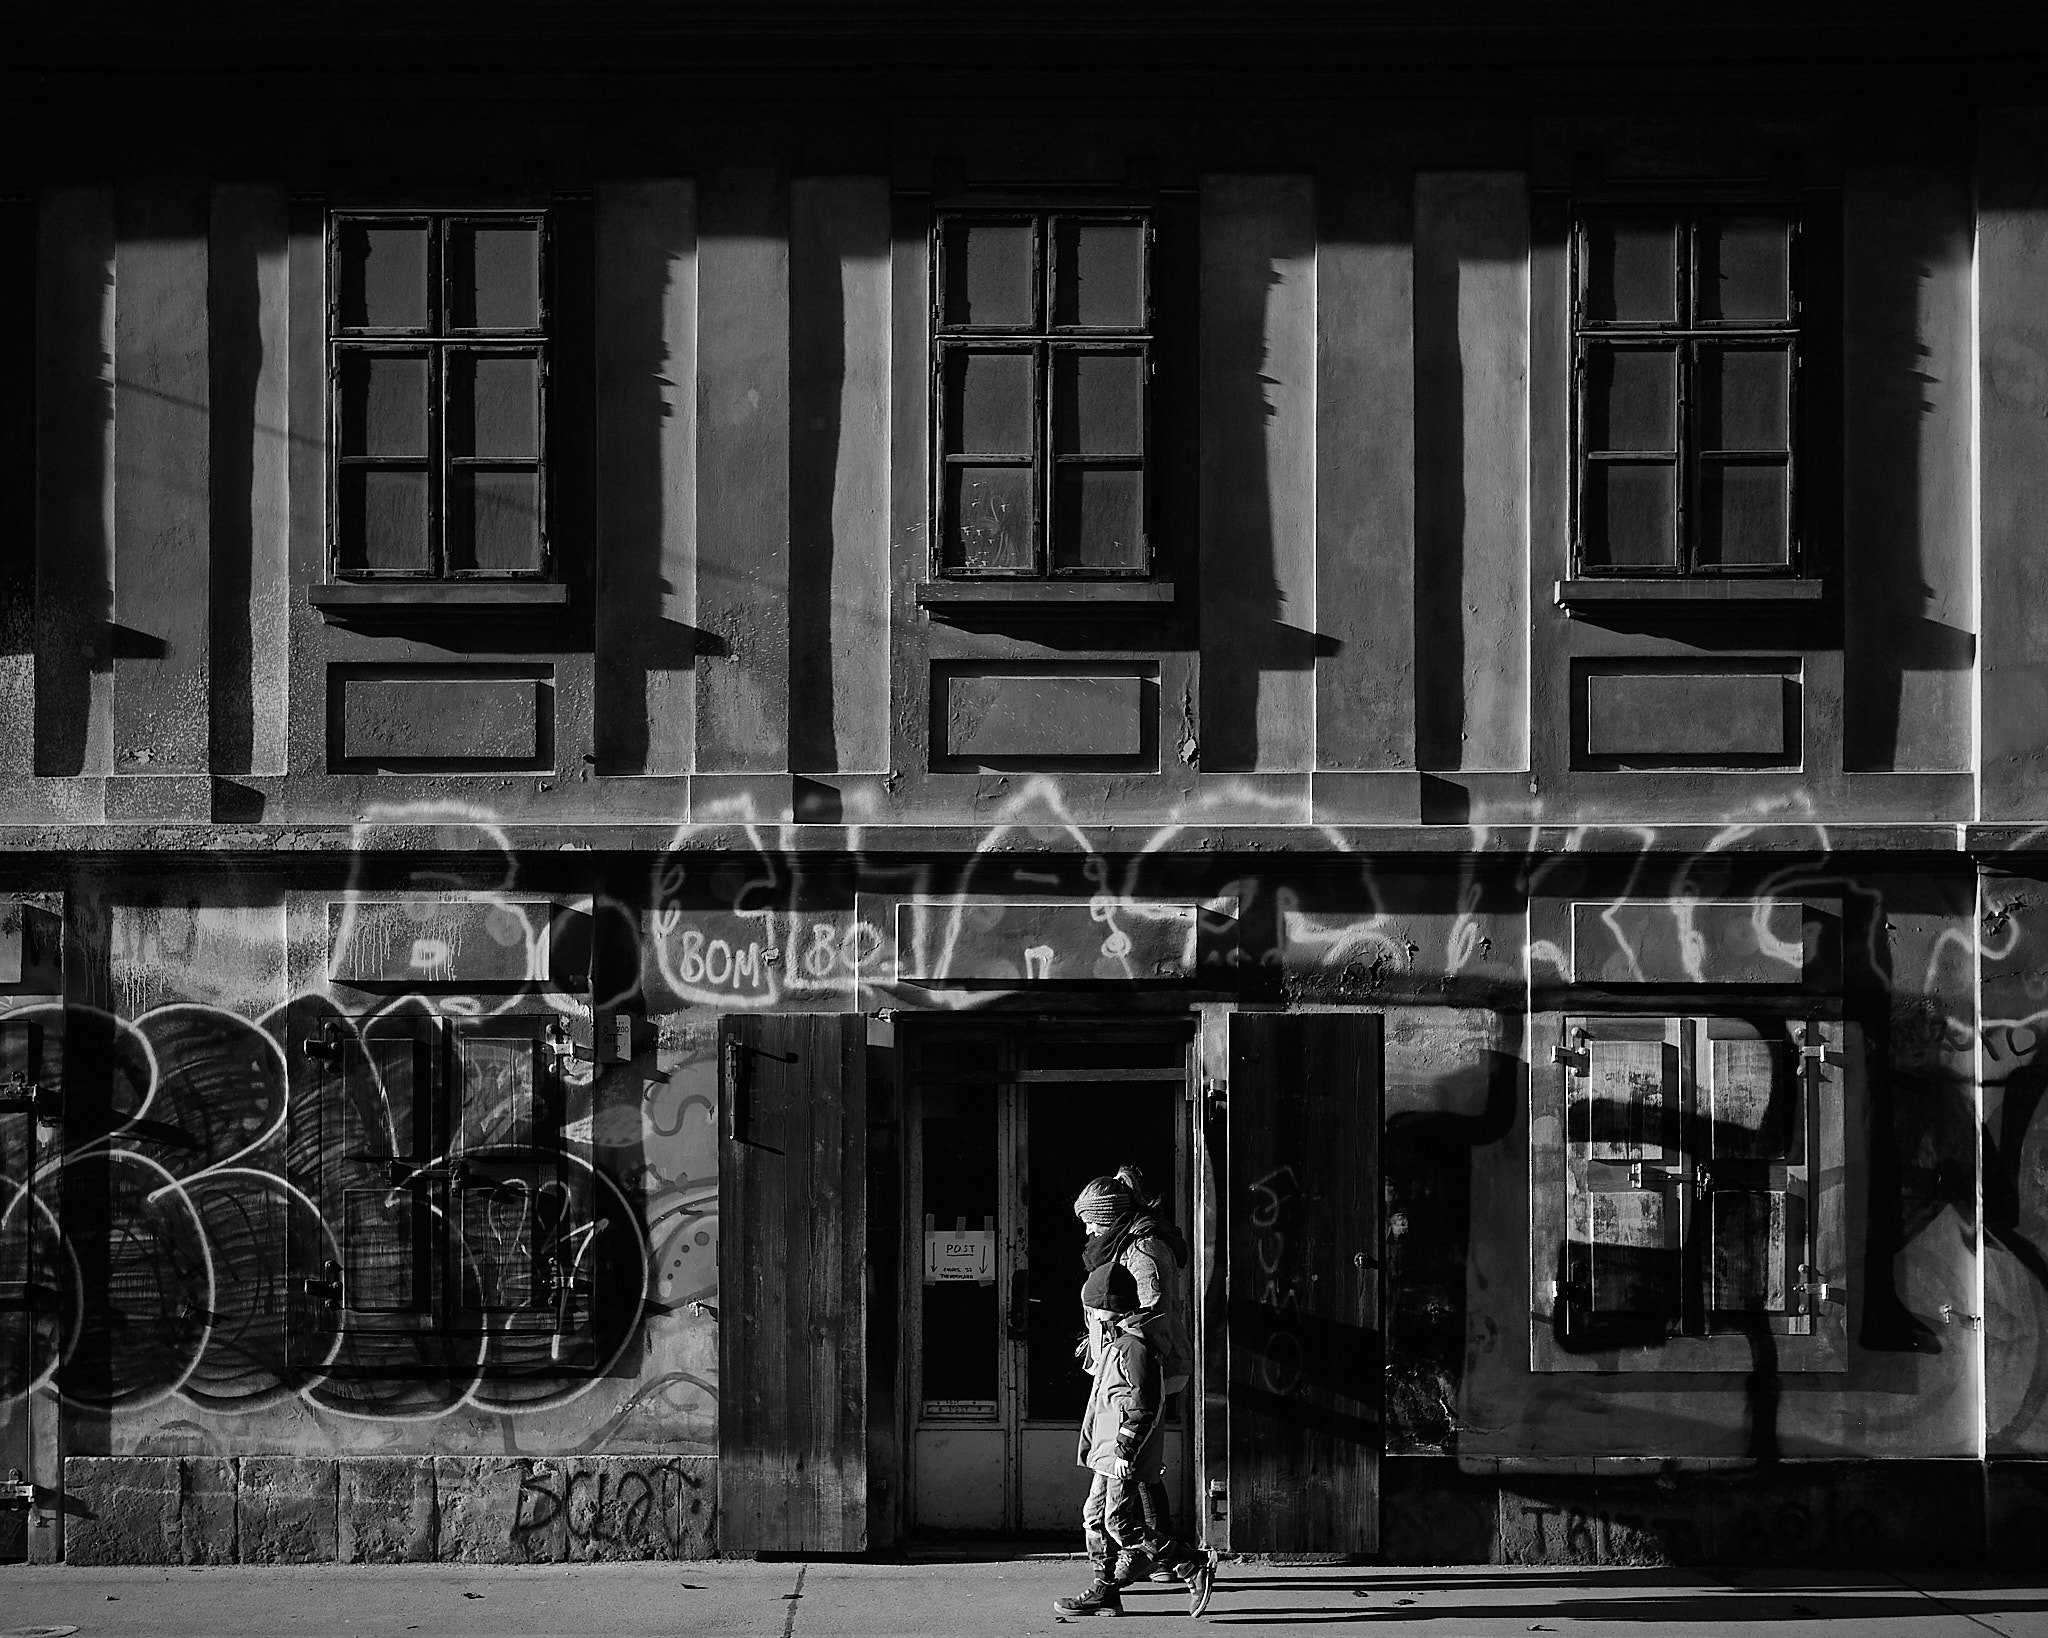 A black and white photograph depicts an adult and a child walking side by side past a building with a textured facade, adorned with graffiti and partially illuminated by sunlight casting strong shadows from window shutters.